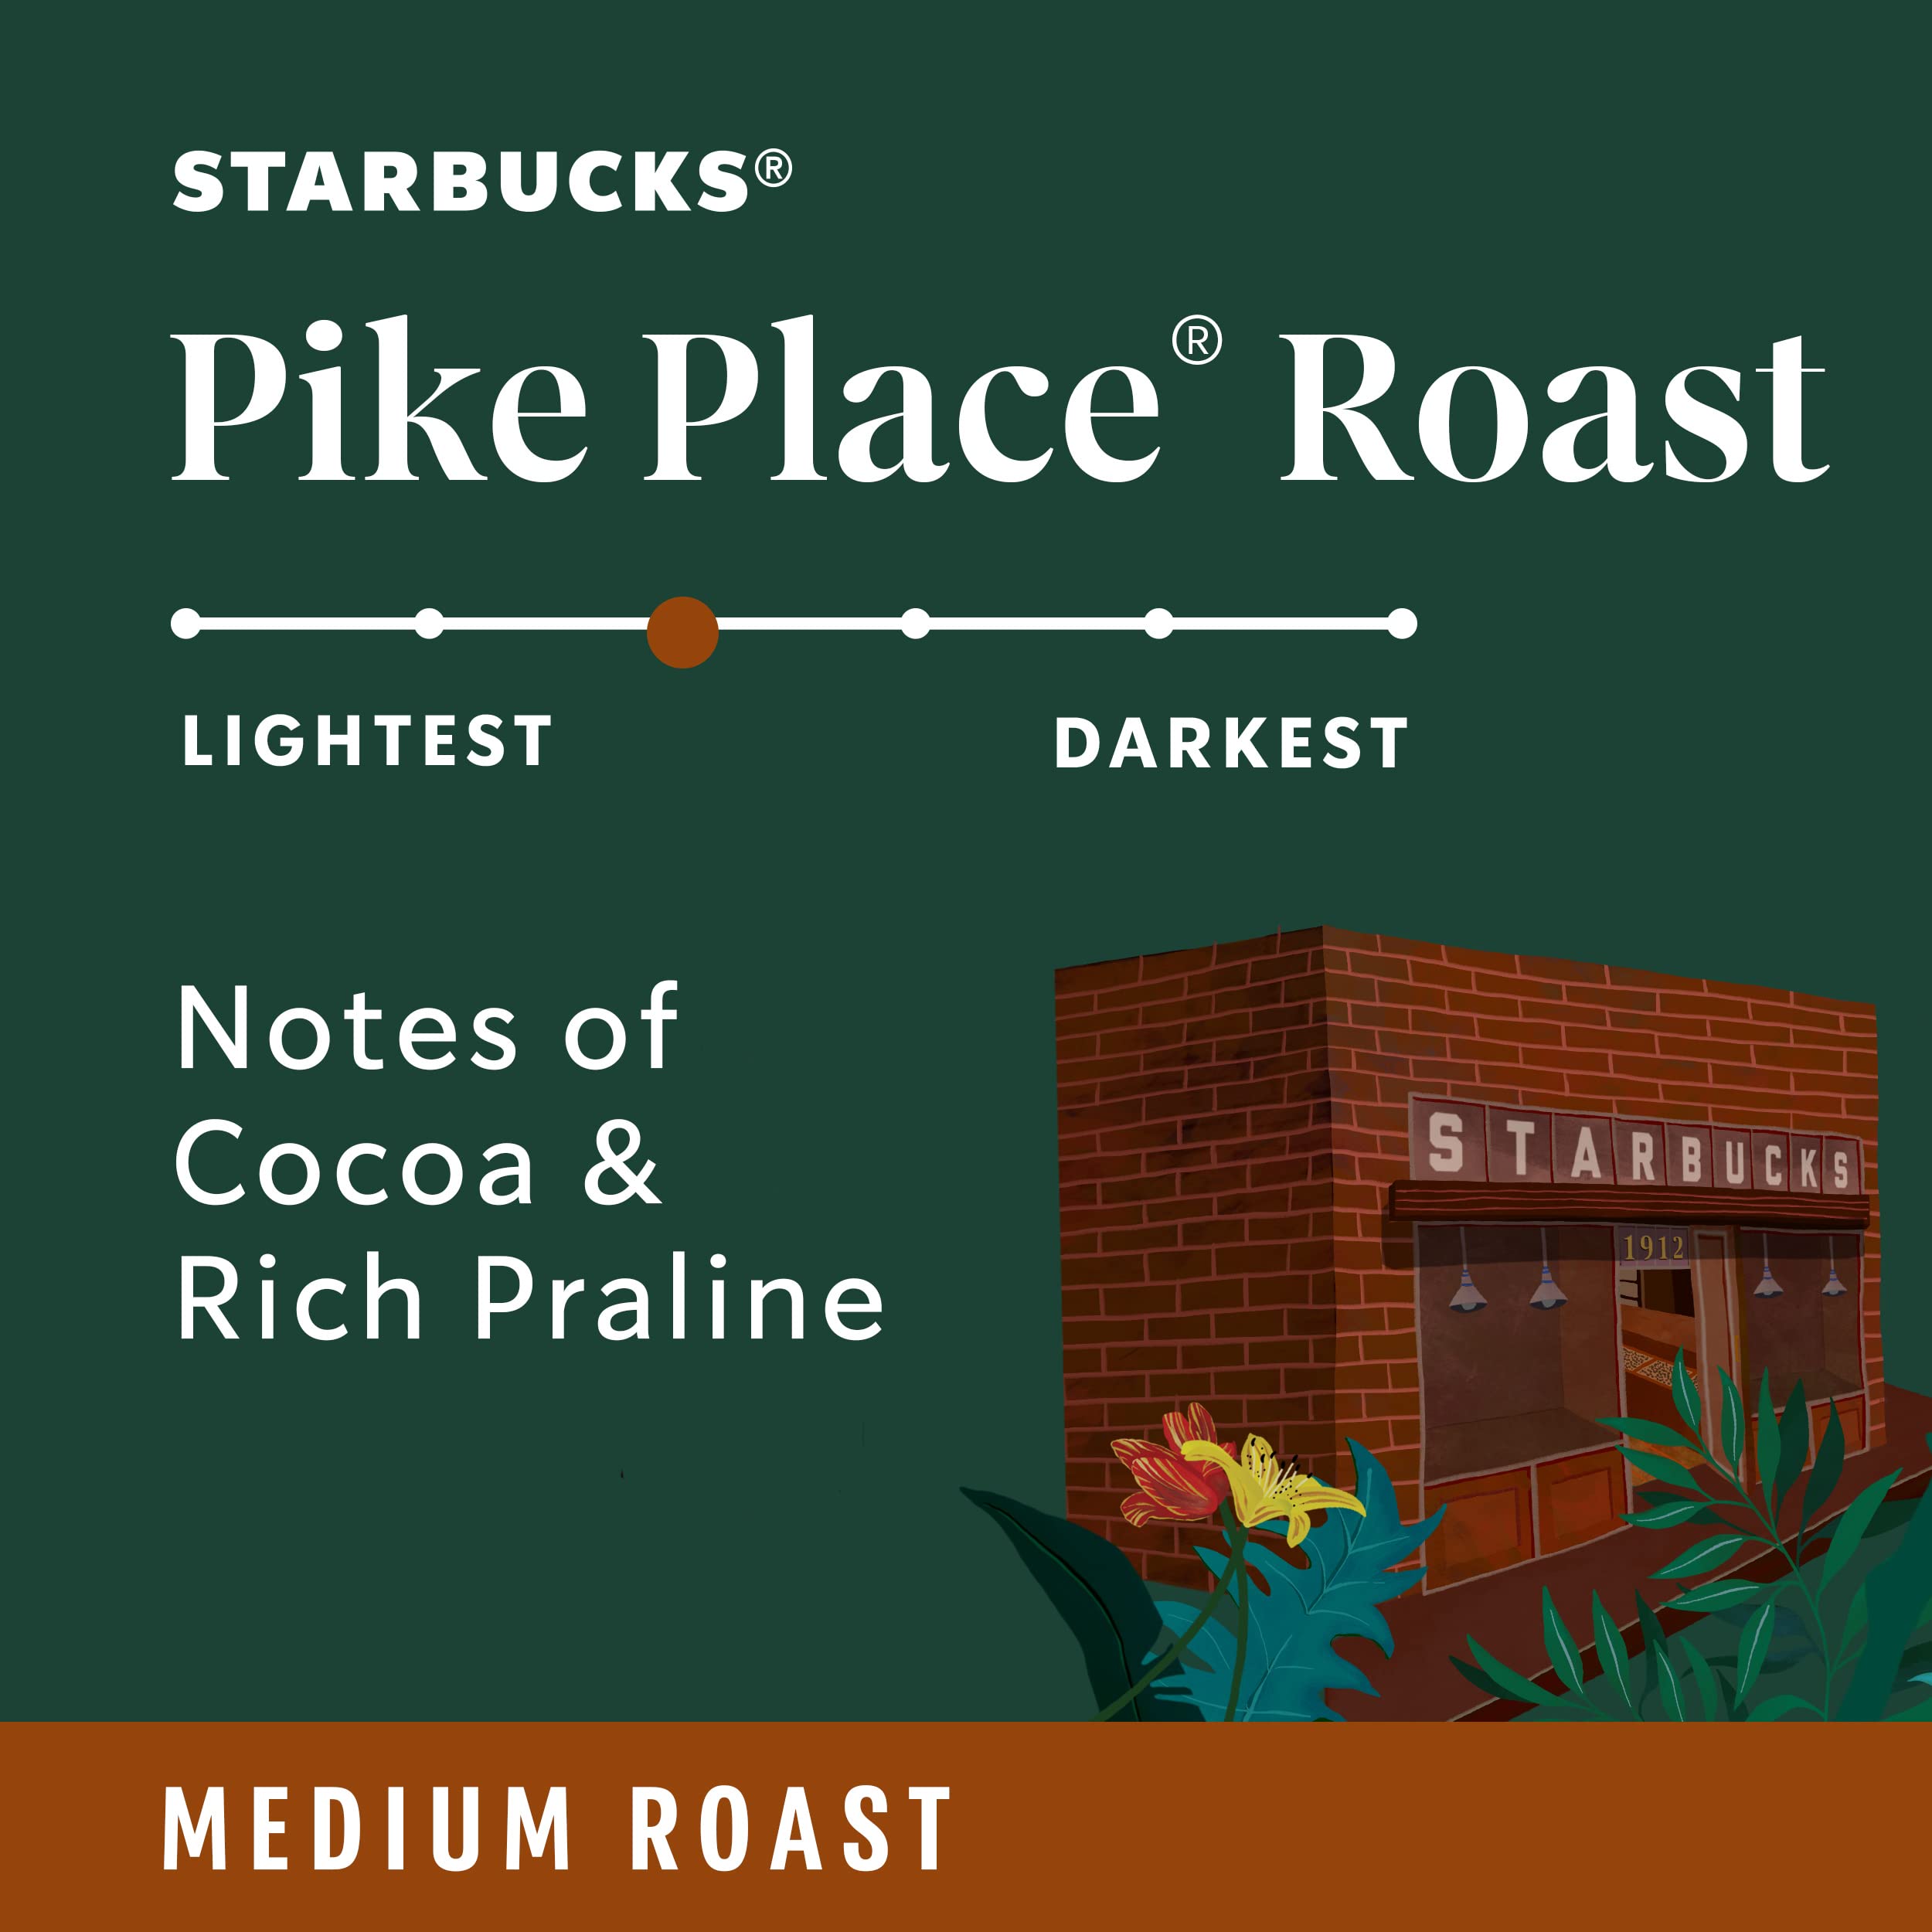 40-Count Starbucks Medium Roast K-Cup Coffee Pods (Pike Place Roast) $20.08 + Free S&H w/ Prime or $35+